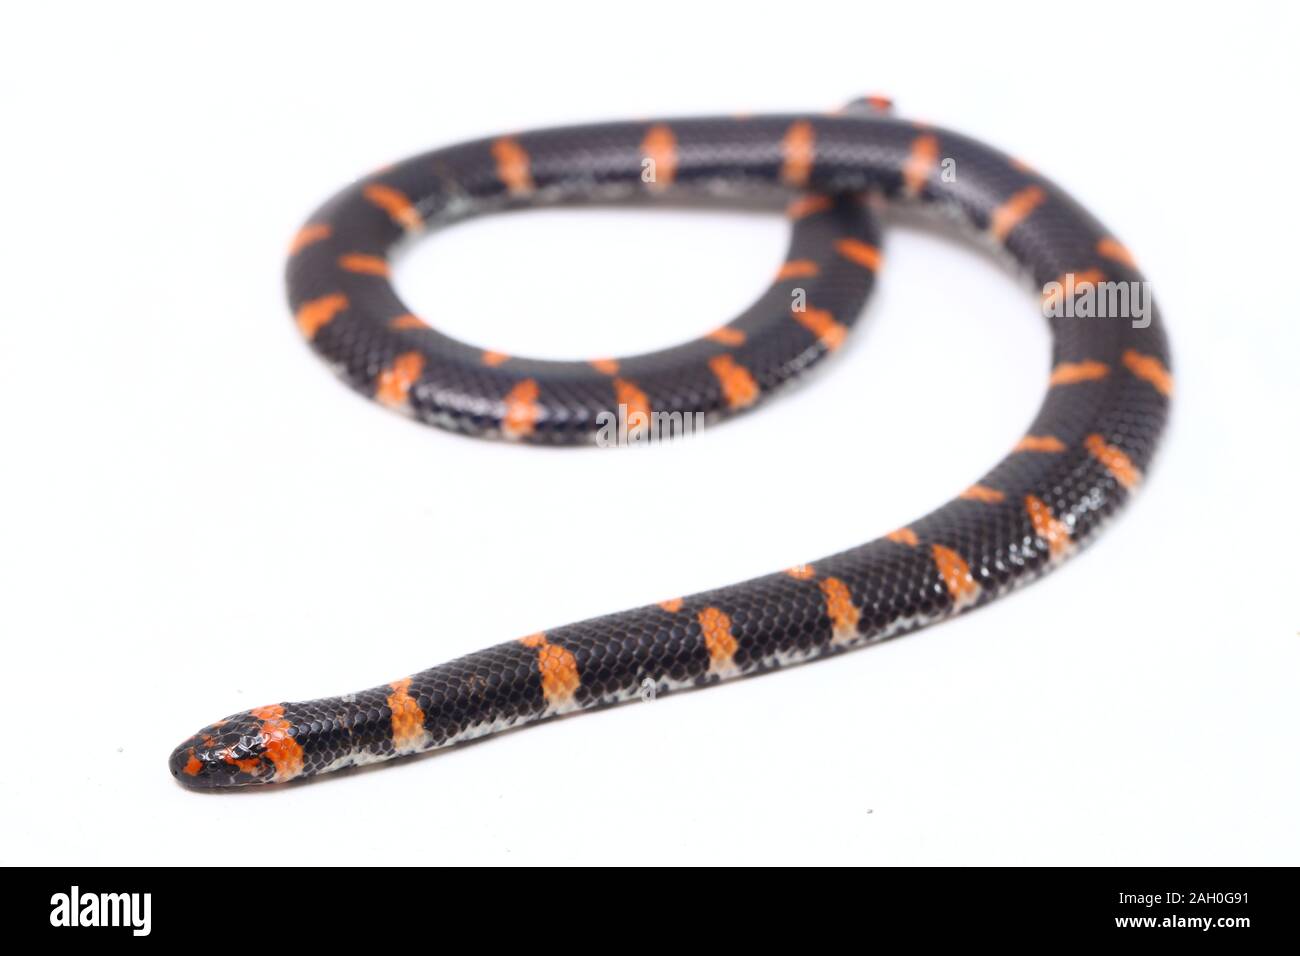 https://c8.alamy.com/comp/2AH0G91/red-tailed-pipe-snake-scientific-name-cylindrophis-ruffus-isolate-on-white-background-2AH0G91.jpg